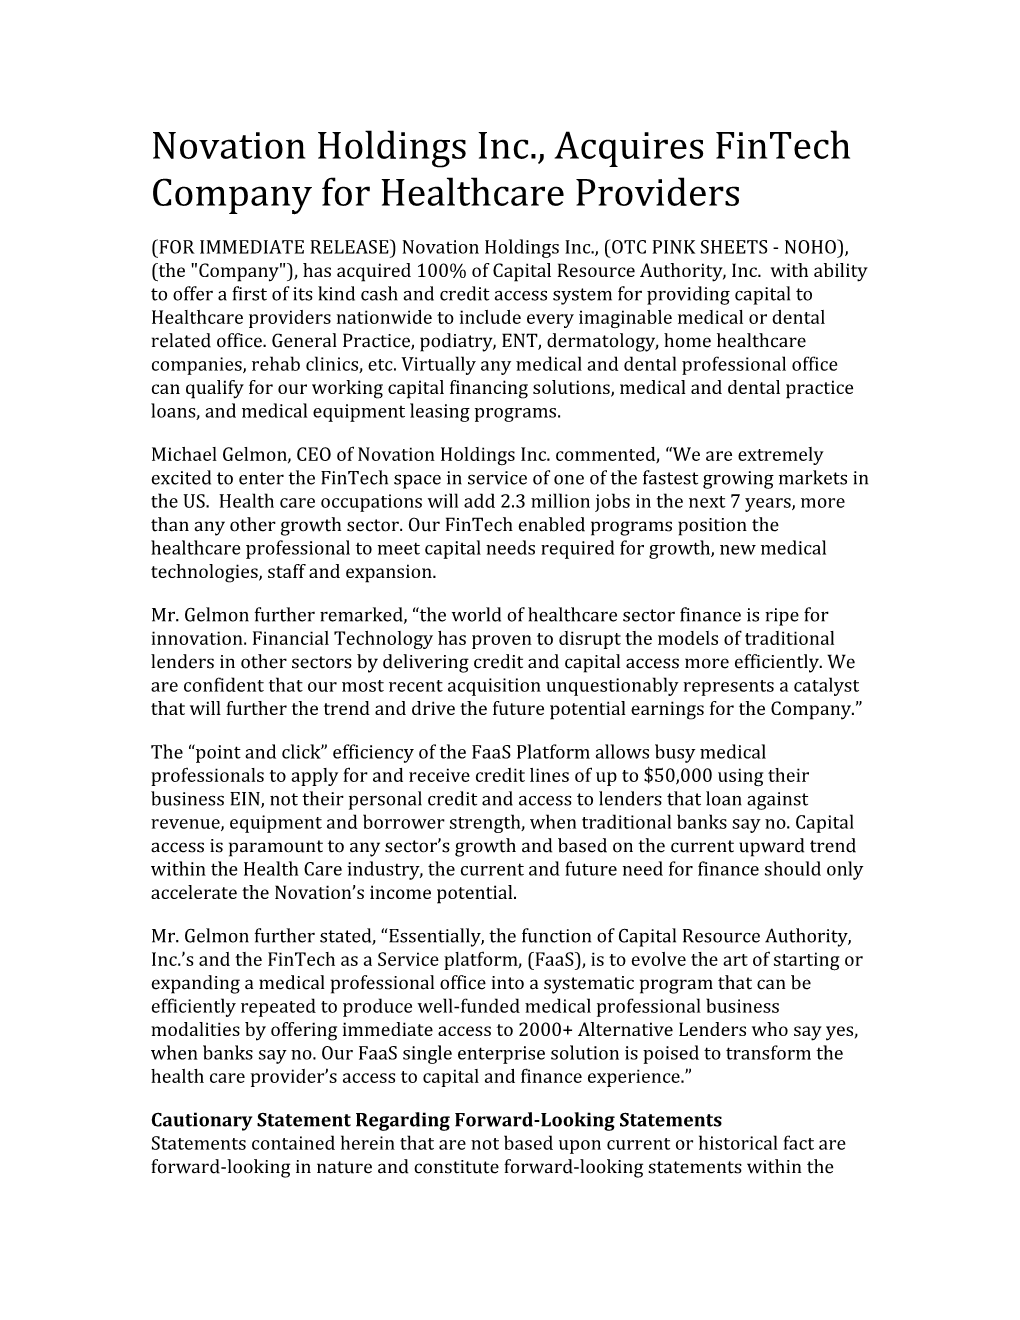 Novation Holdings Inc., Acquires Fintech Company for Healthcare Providers